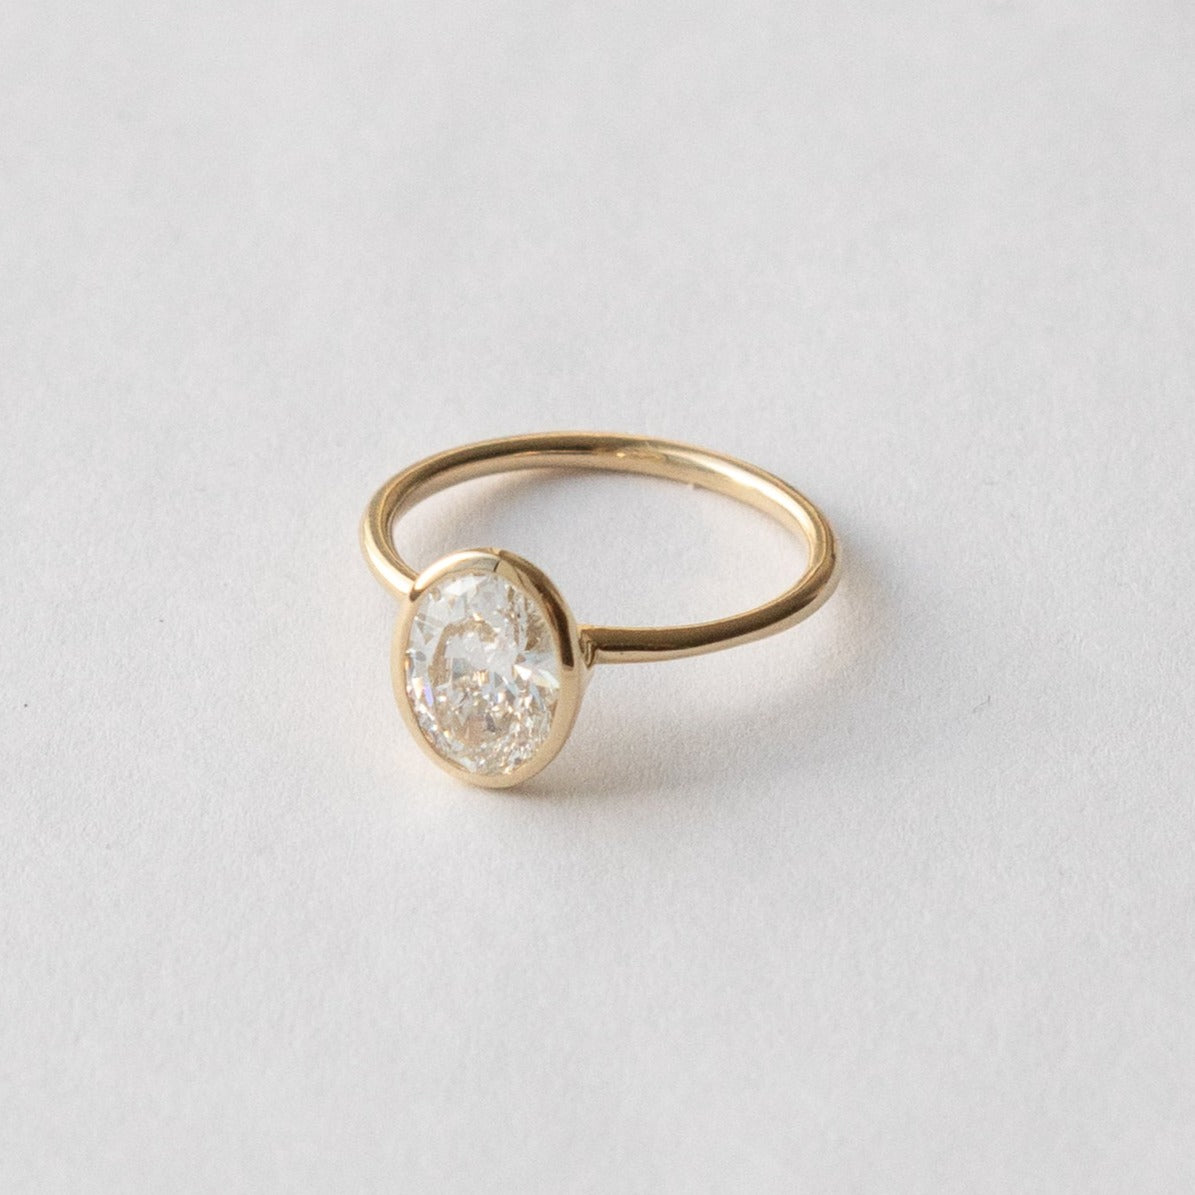 Artu Unique Ring in 14k Gold set with 1.51ct oval cut lab-grown diamond By SHW Fine Jewelry NYC